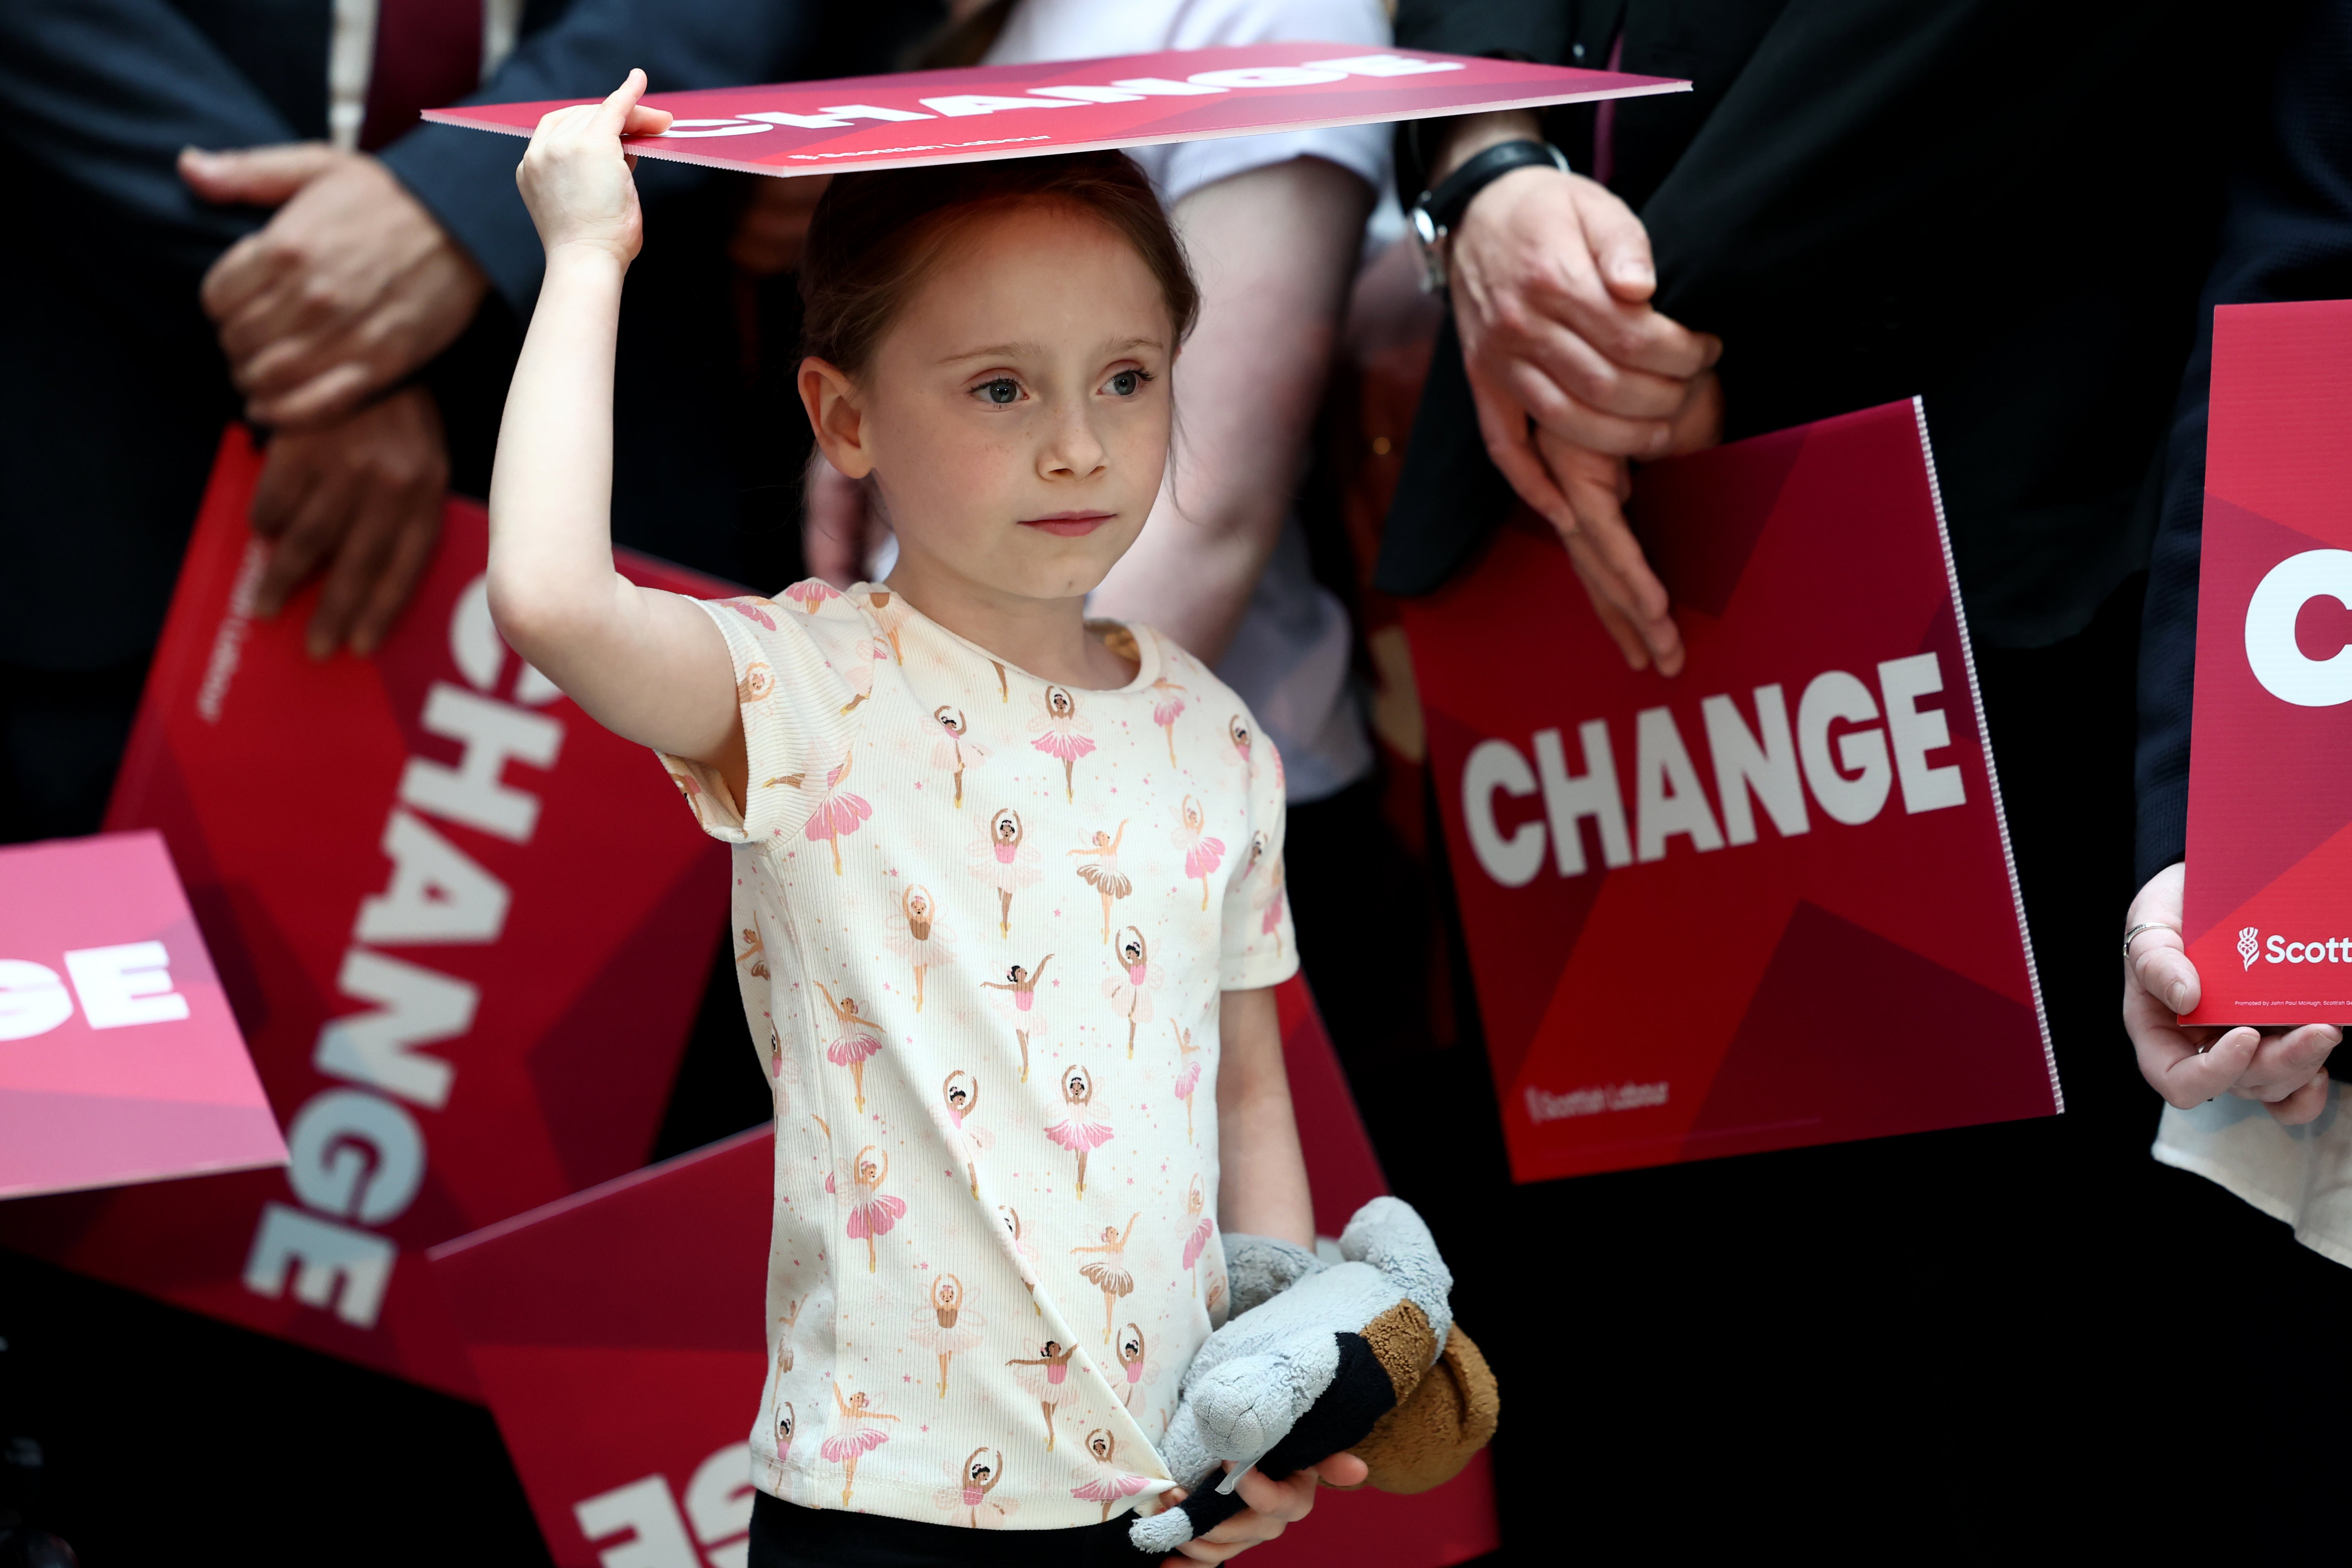 A young supporter holds a sign reading "Change" as they wait for the launch of the Scottish Labour general election campaign at Caledonia House